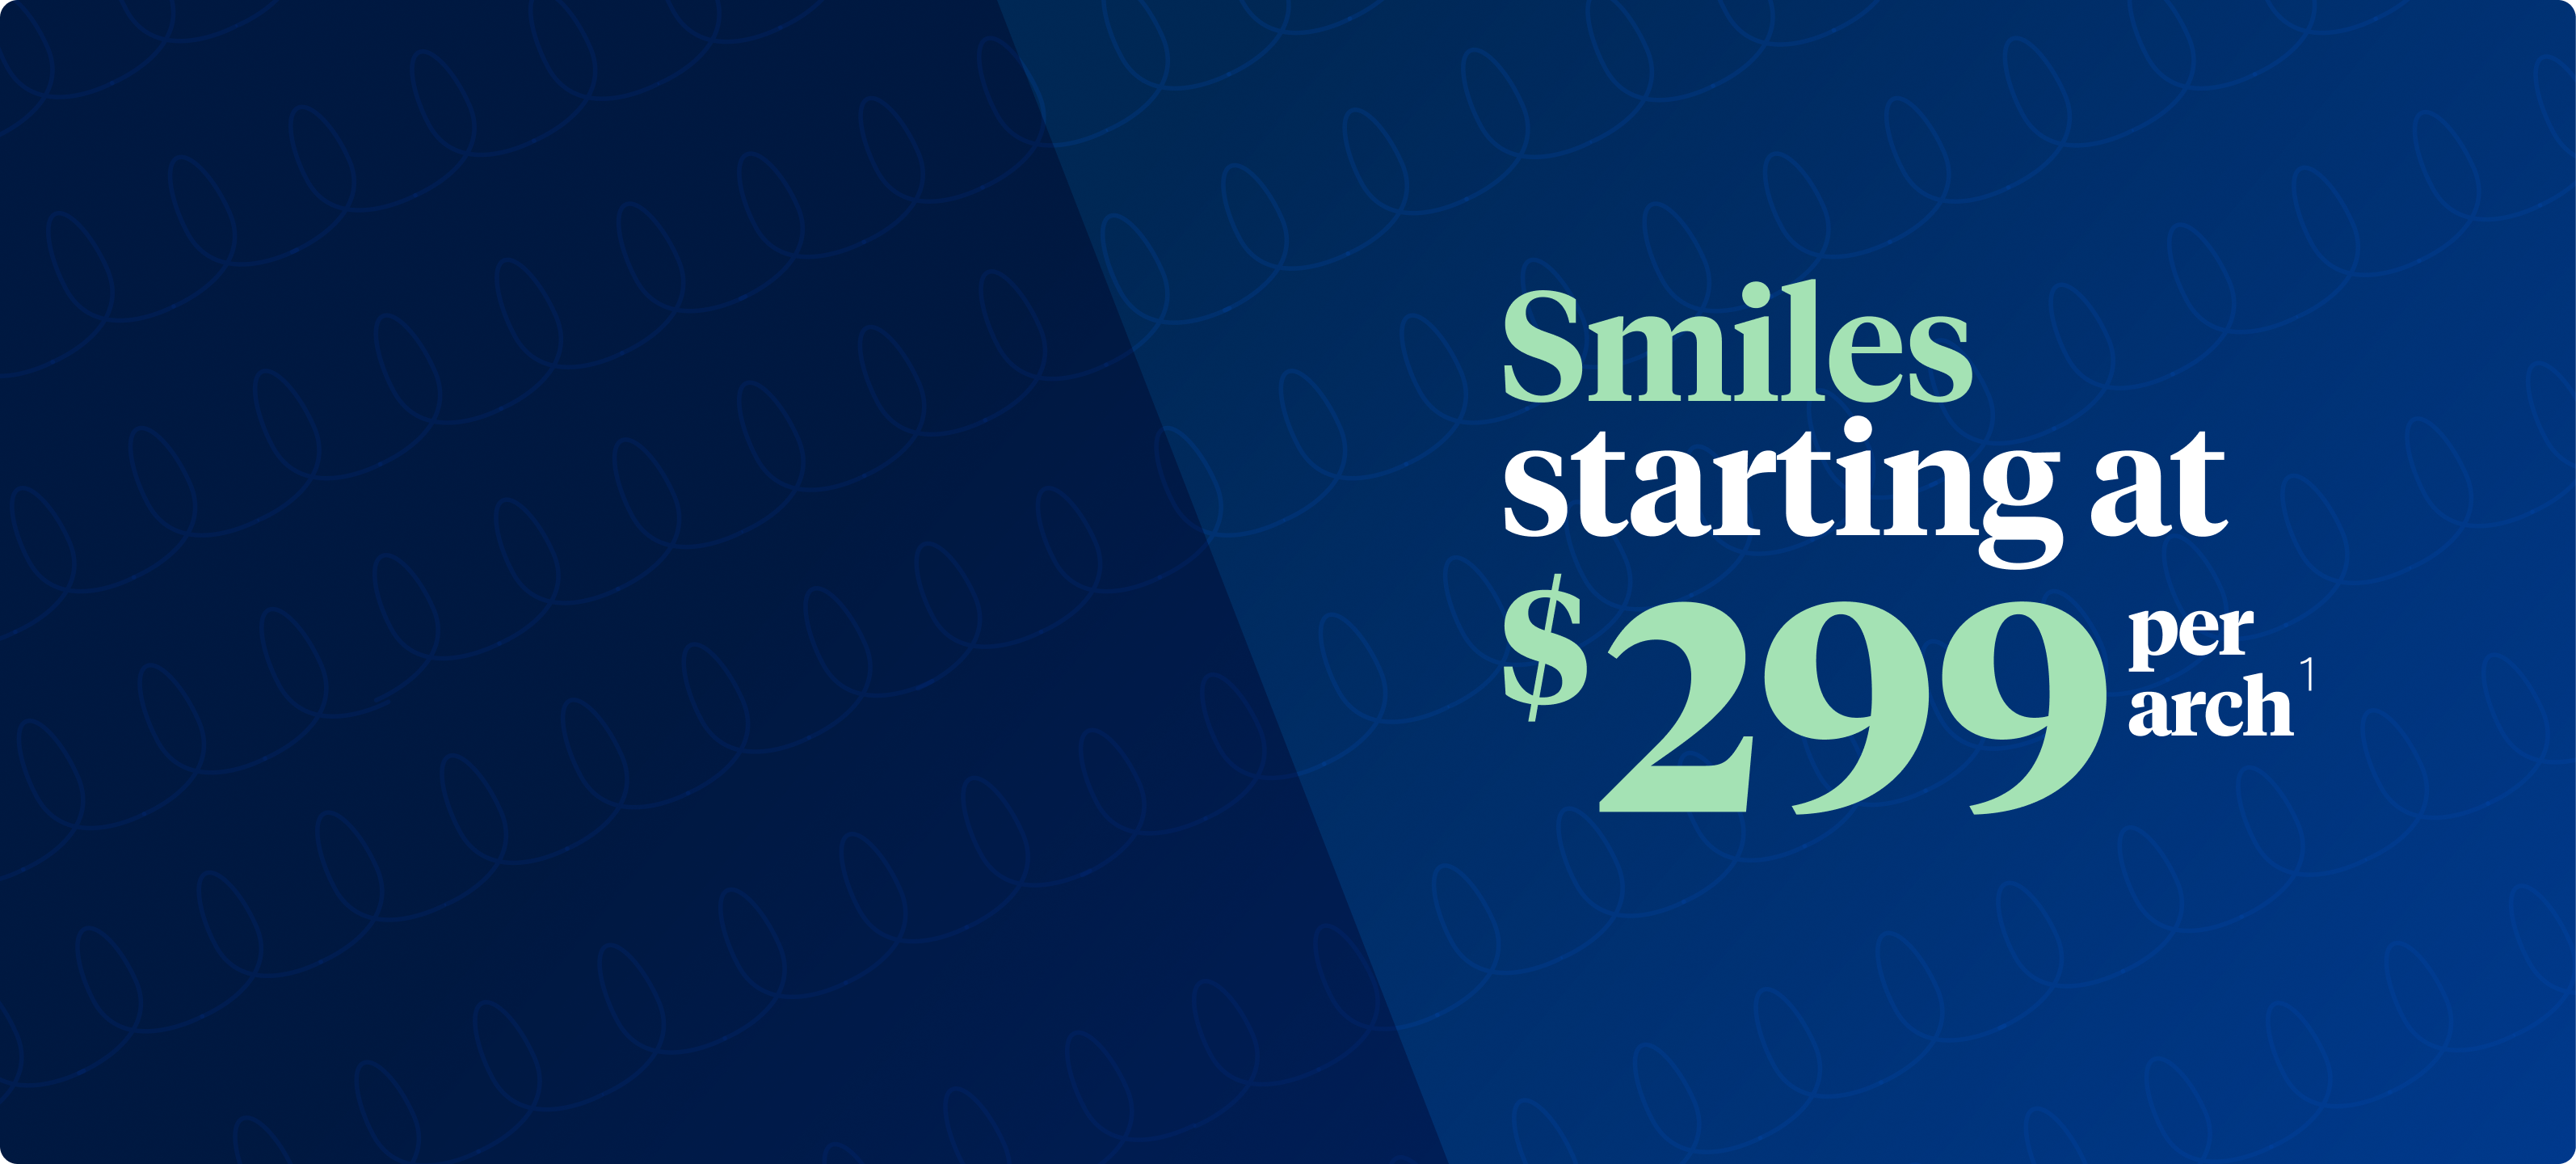 Smiles starting at $299 per arch.